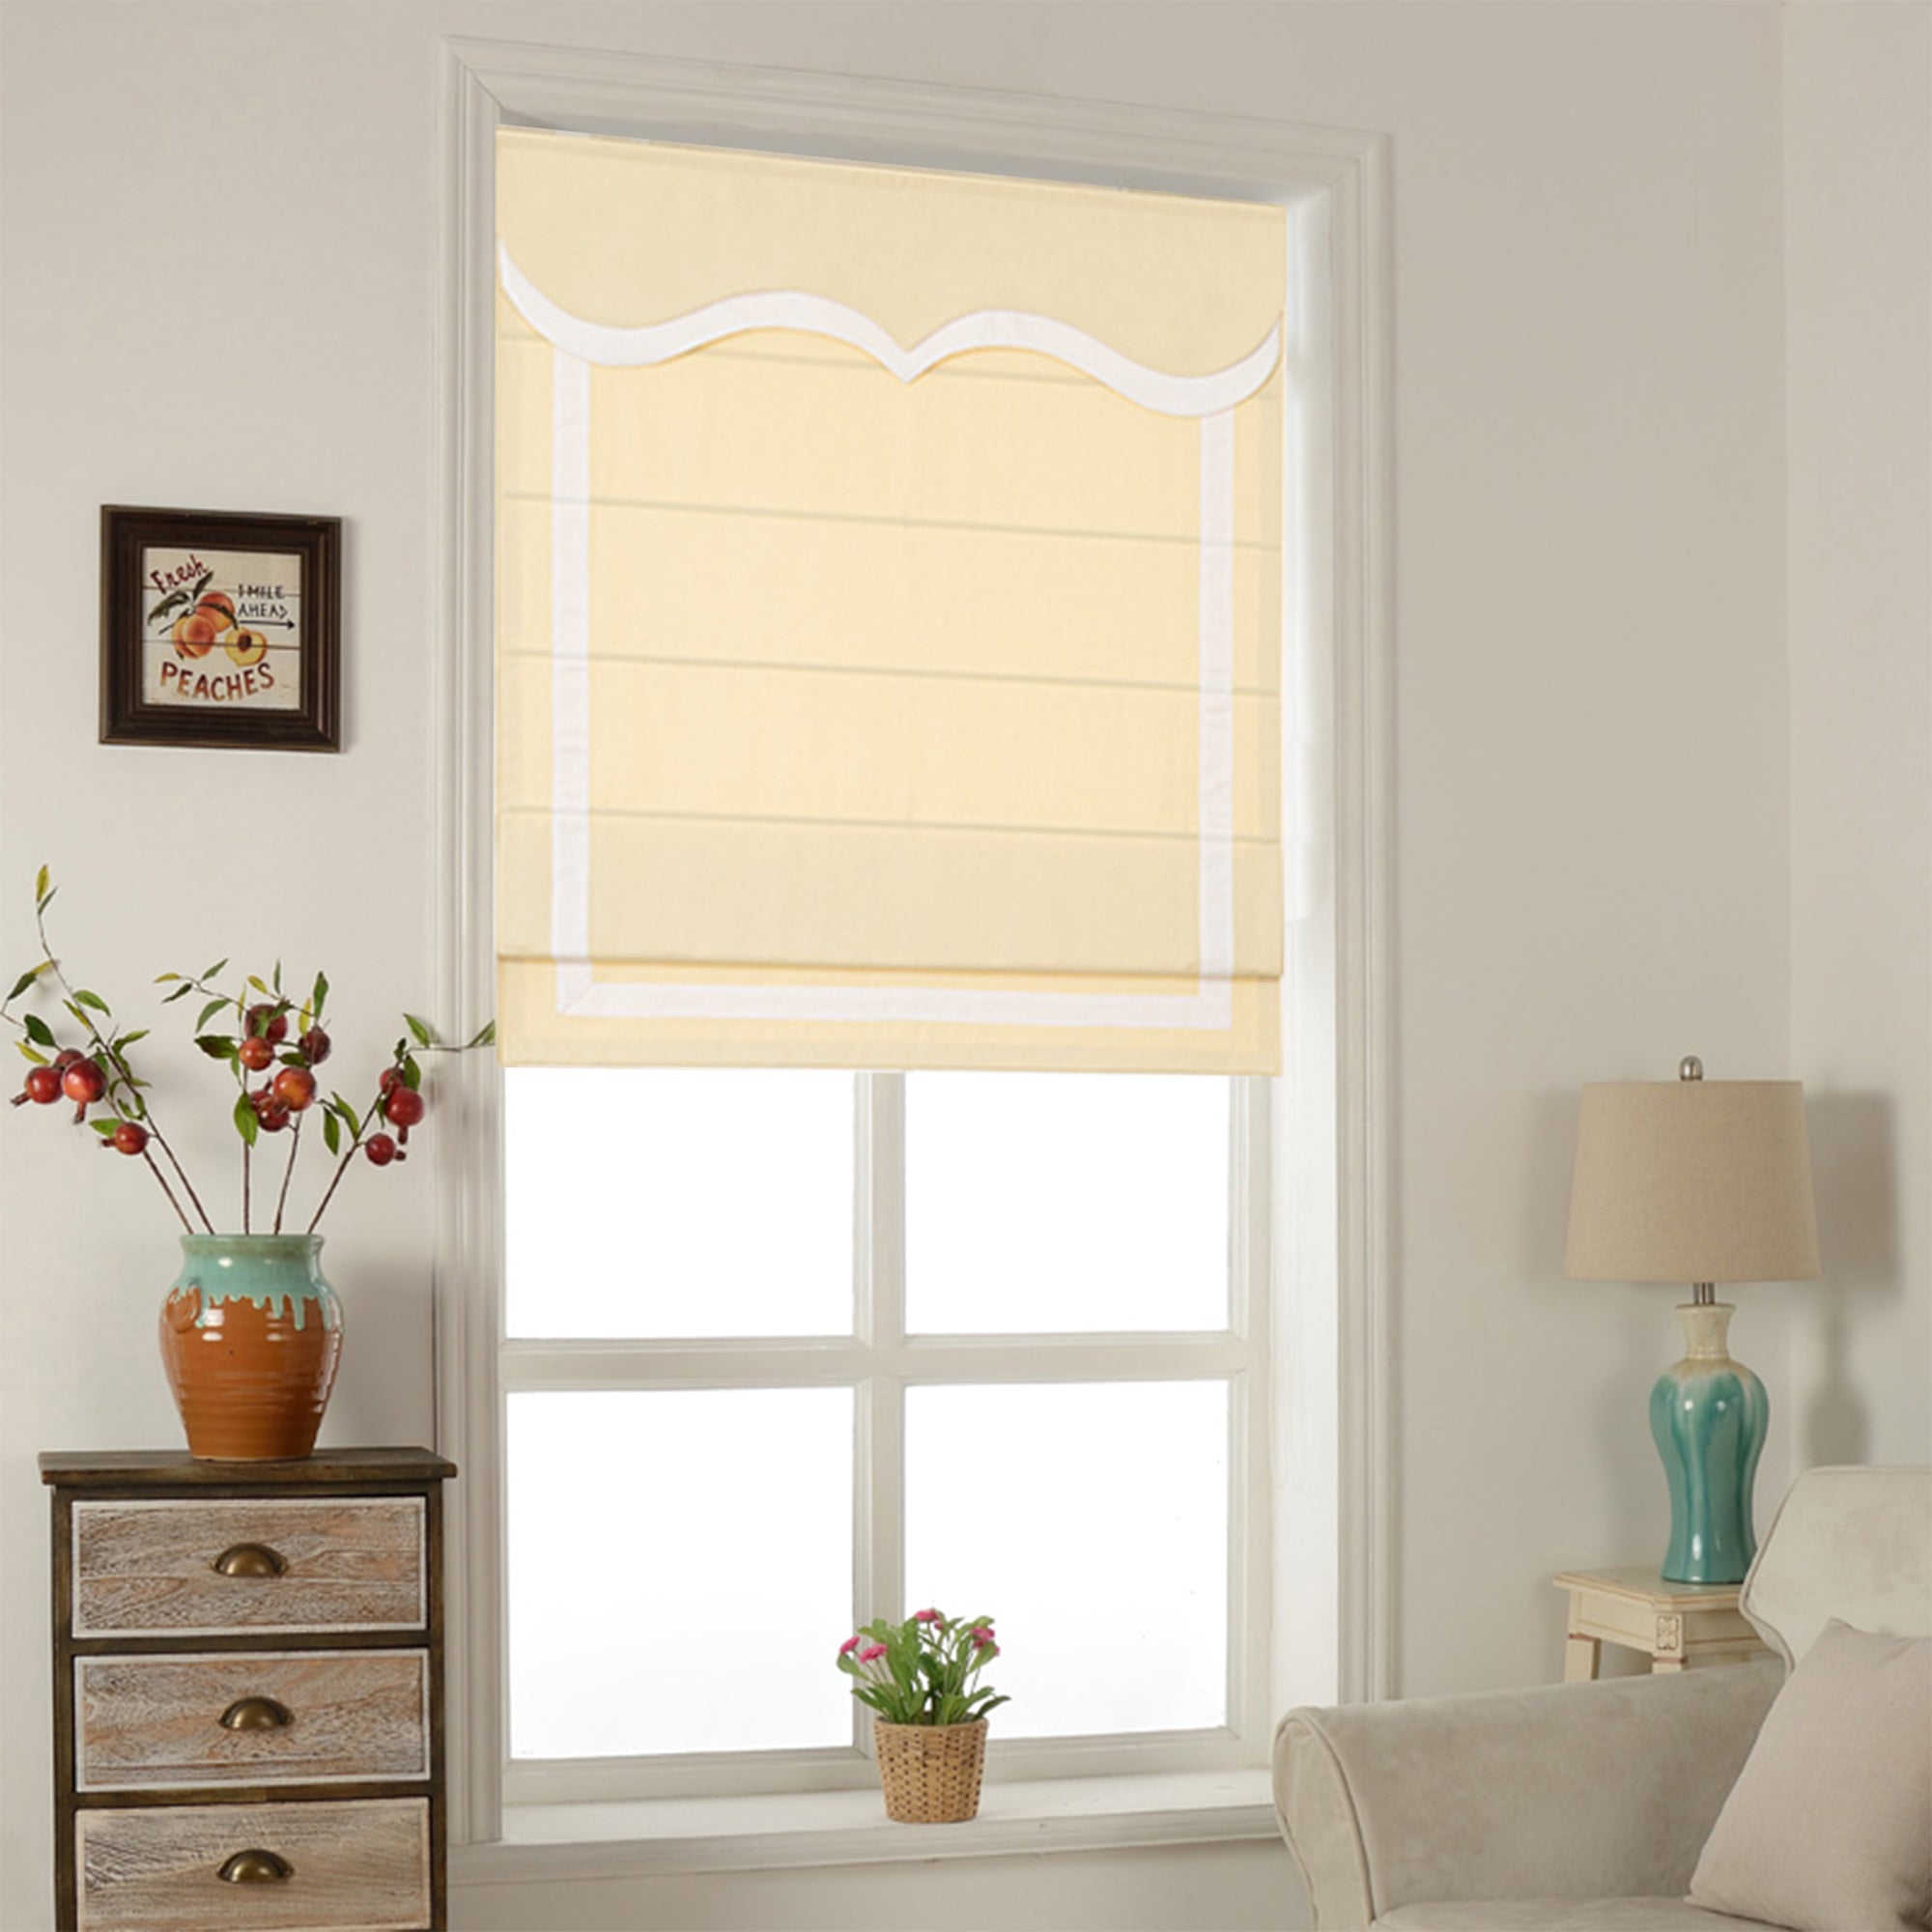 Quick Fix Washable Roman Window Shades Flat Fold with Valance, SG-012 Yellow with White trim